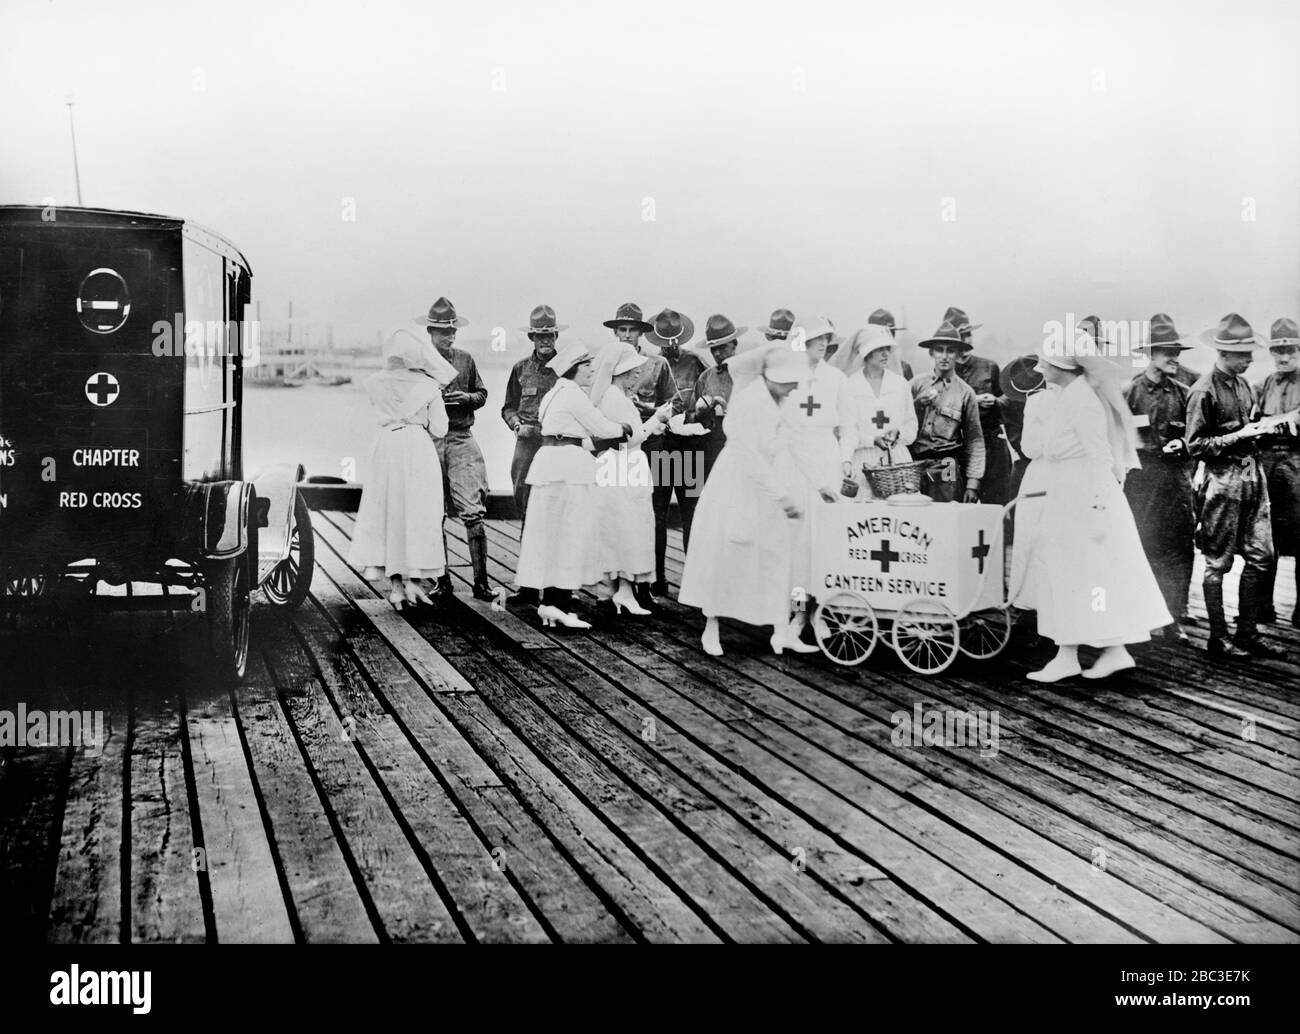 American Red Cross Canteen Service during Influenza Epidemic, New Orleans, Louisiana, USA, American National Red Cross Photograph Collection, February 1919 Stock Photo